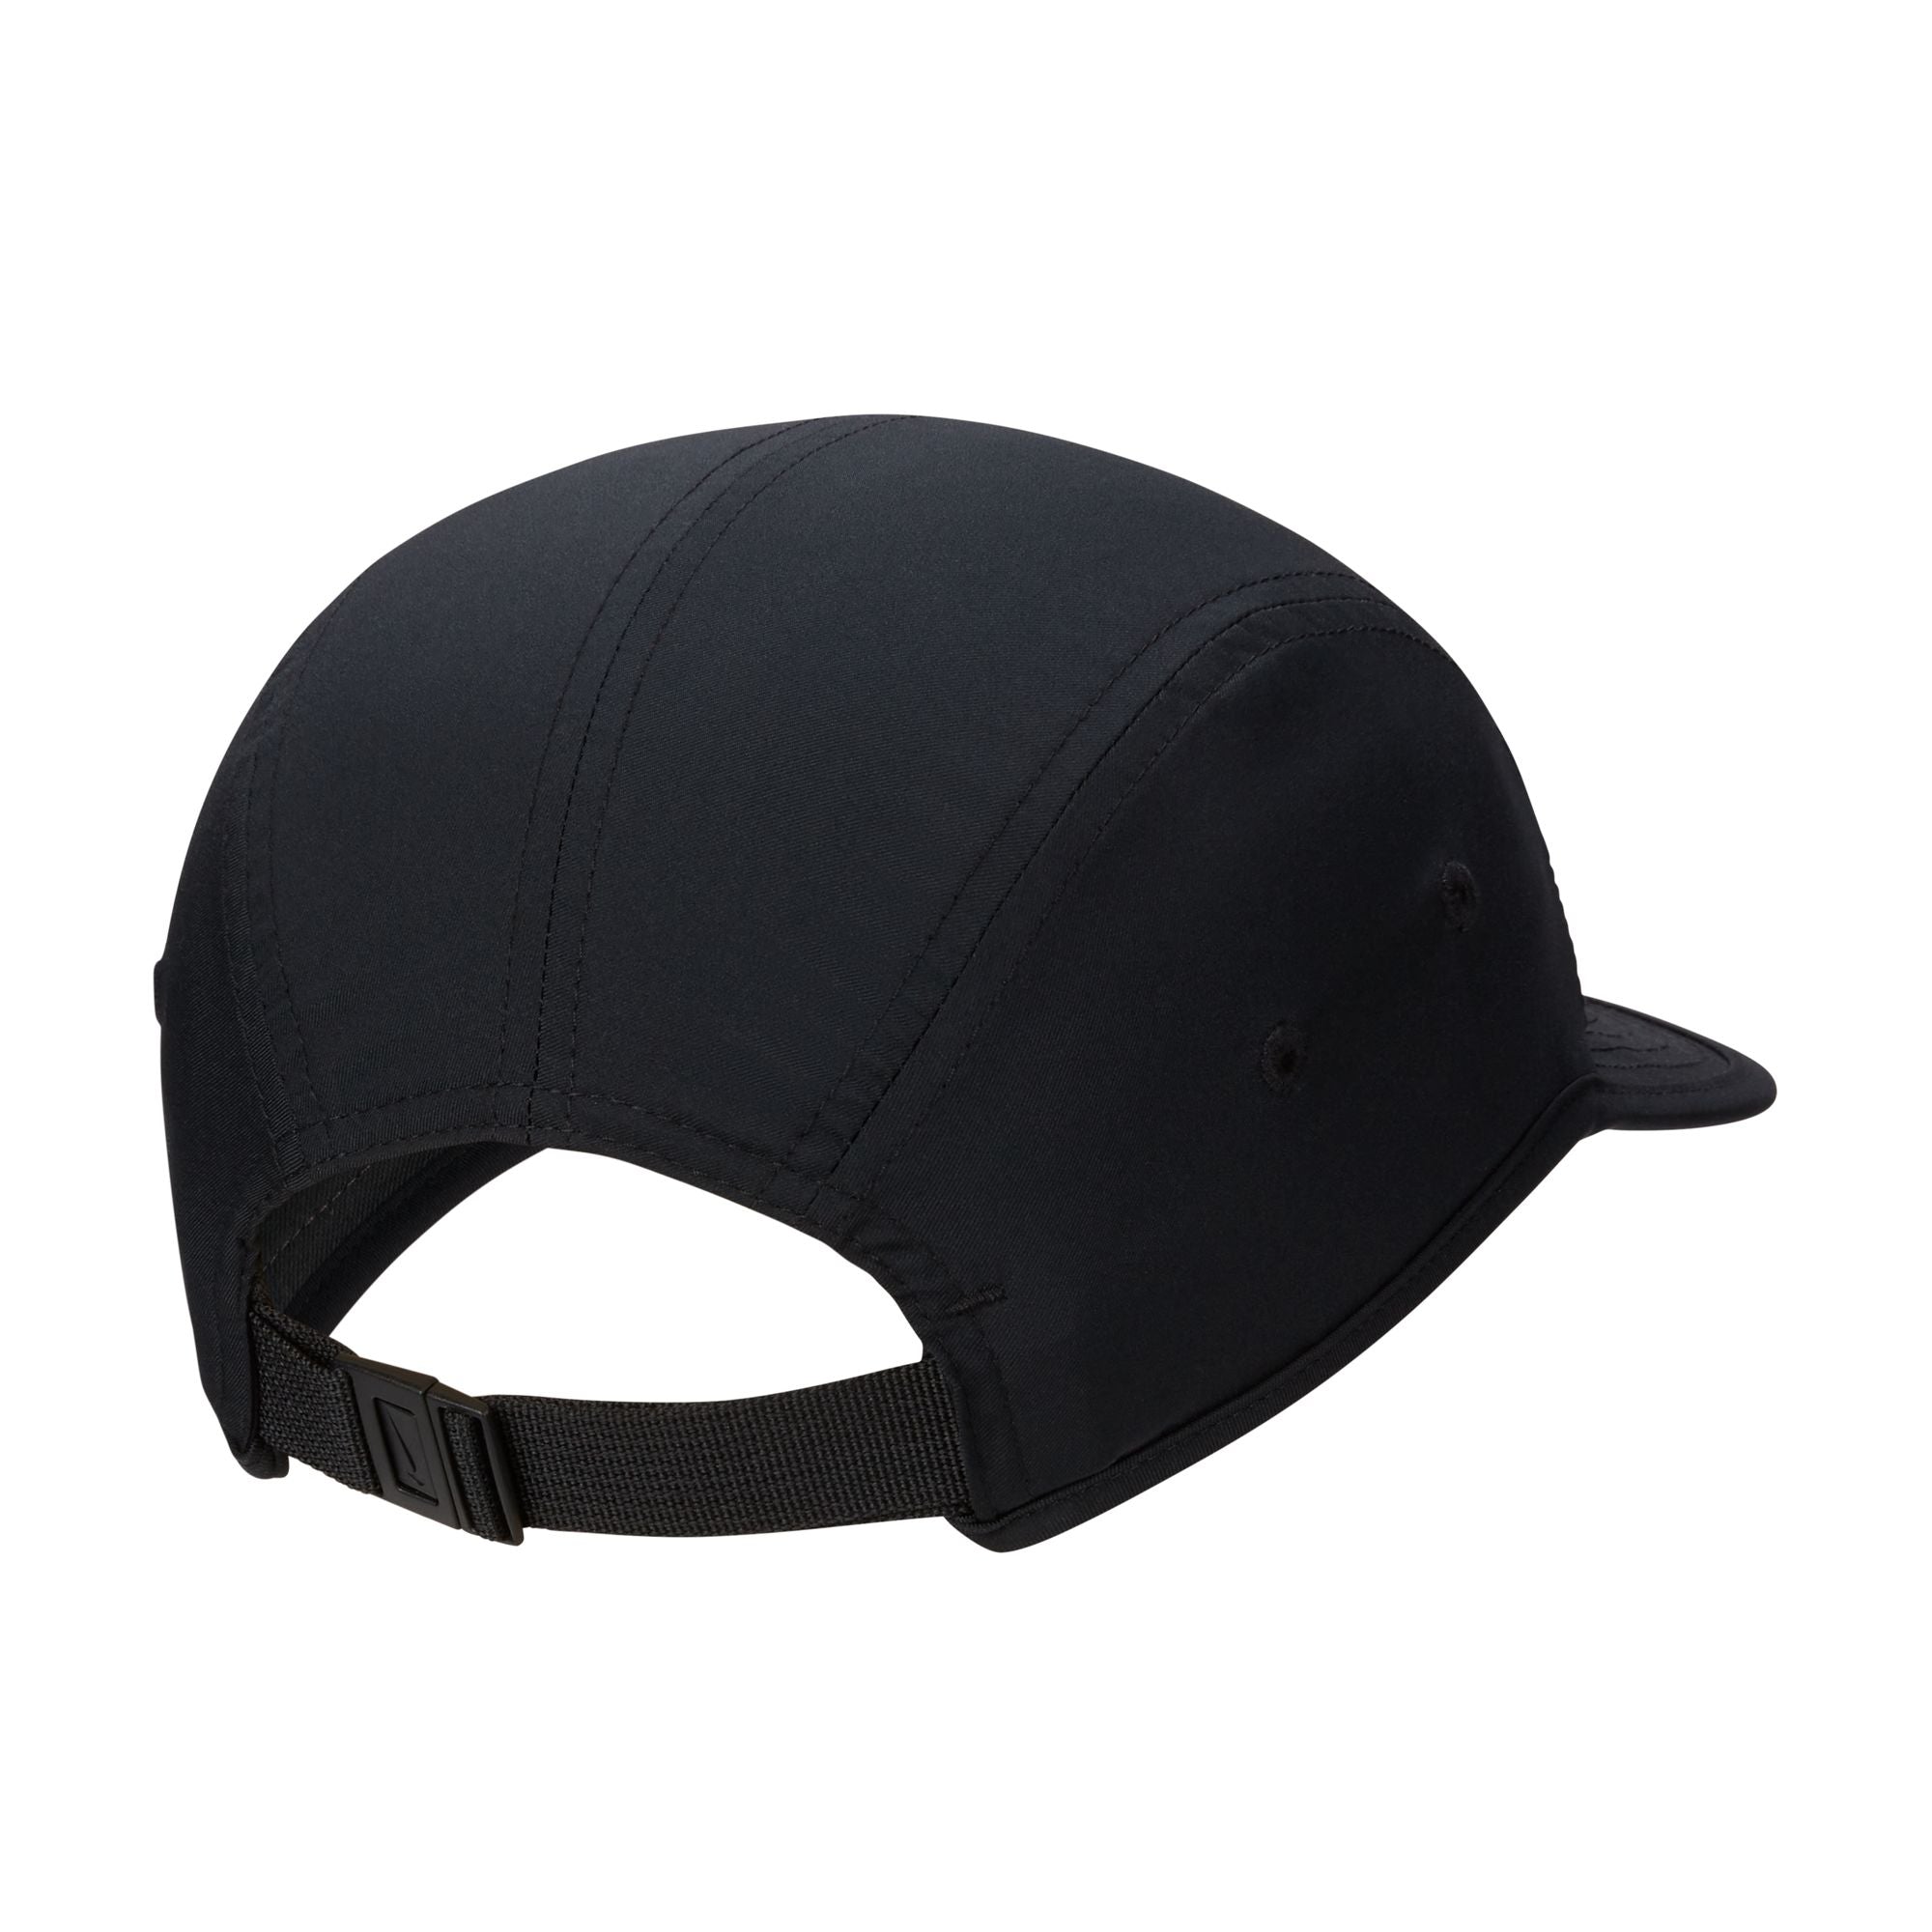 Black Nike cap with white swoosh. Free uk shipping for orders over £50